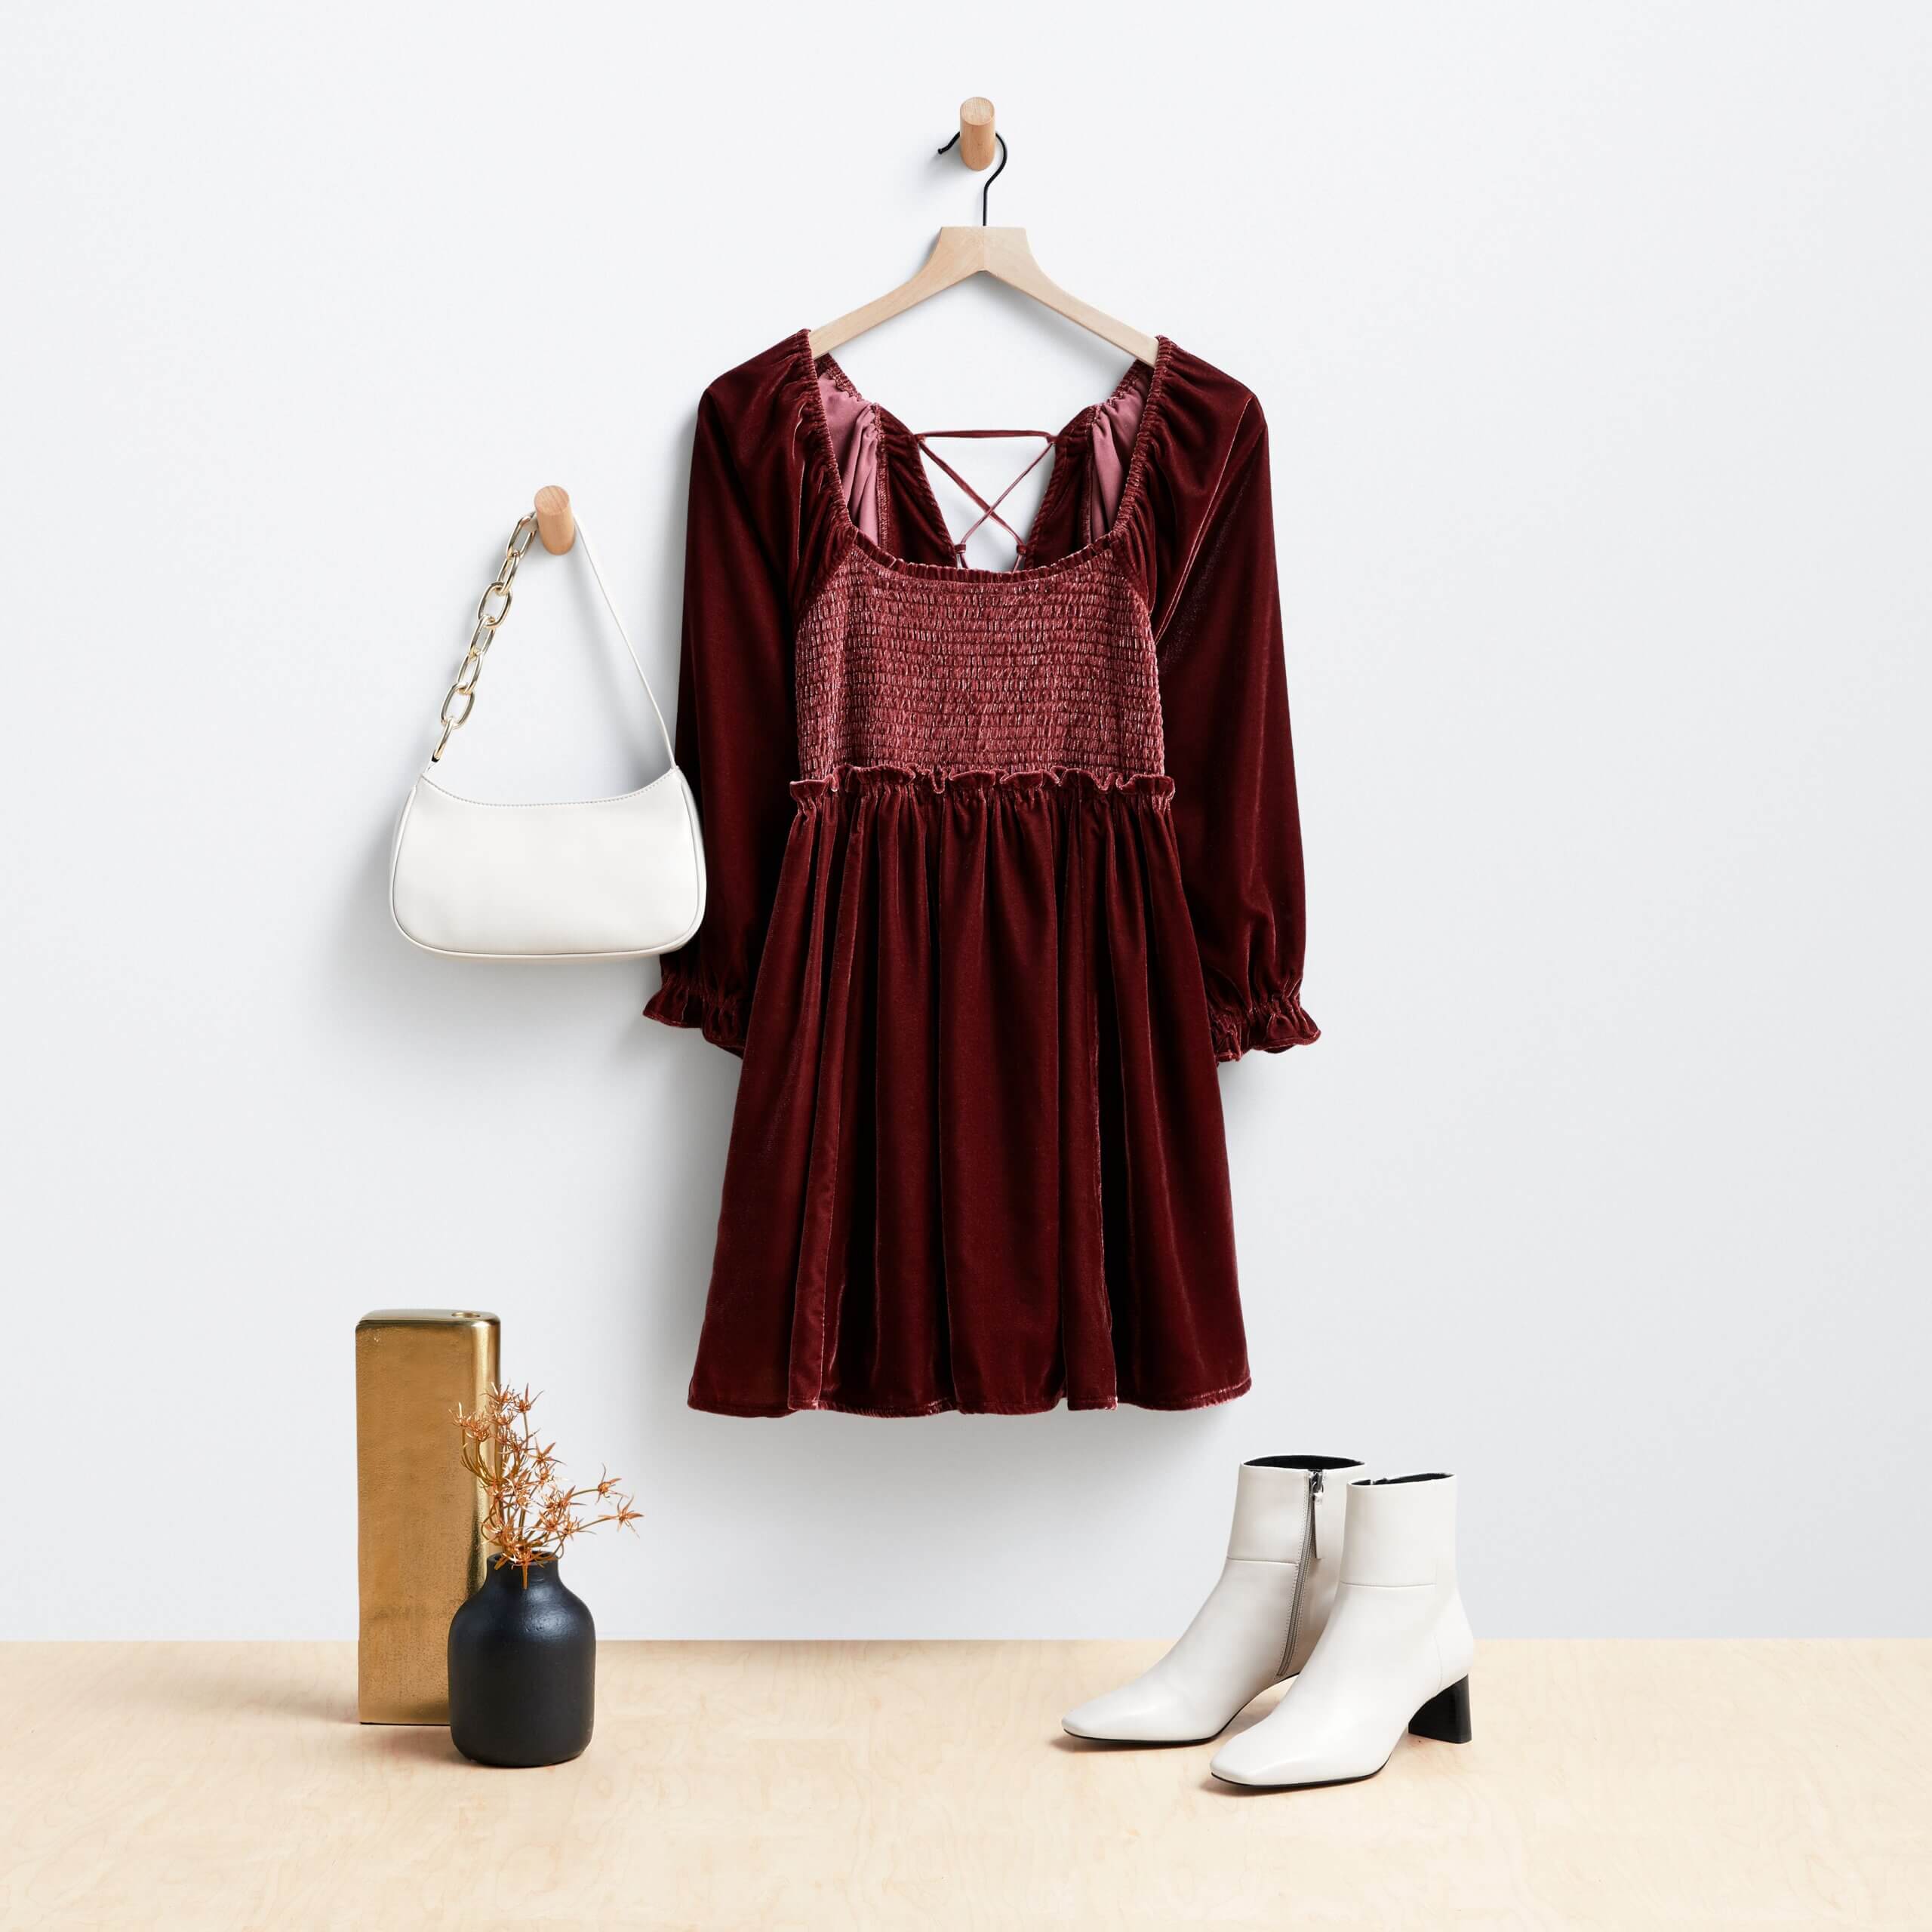 Stitch Fix women's burgundy velvet dress and white purse hanging on wooden hangers, next to white leather booties. 